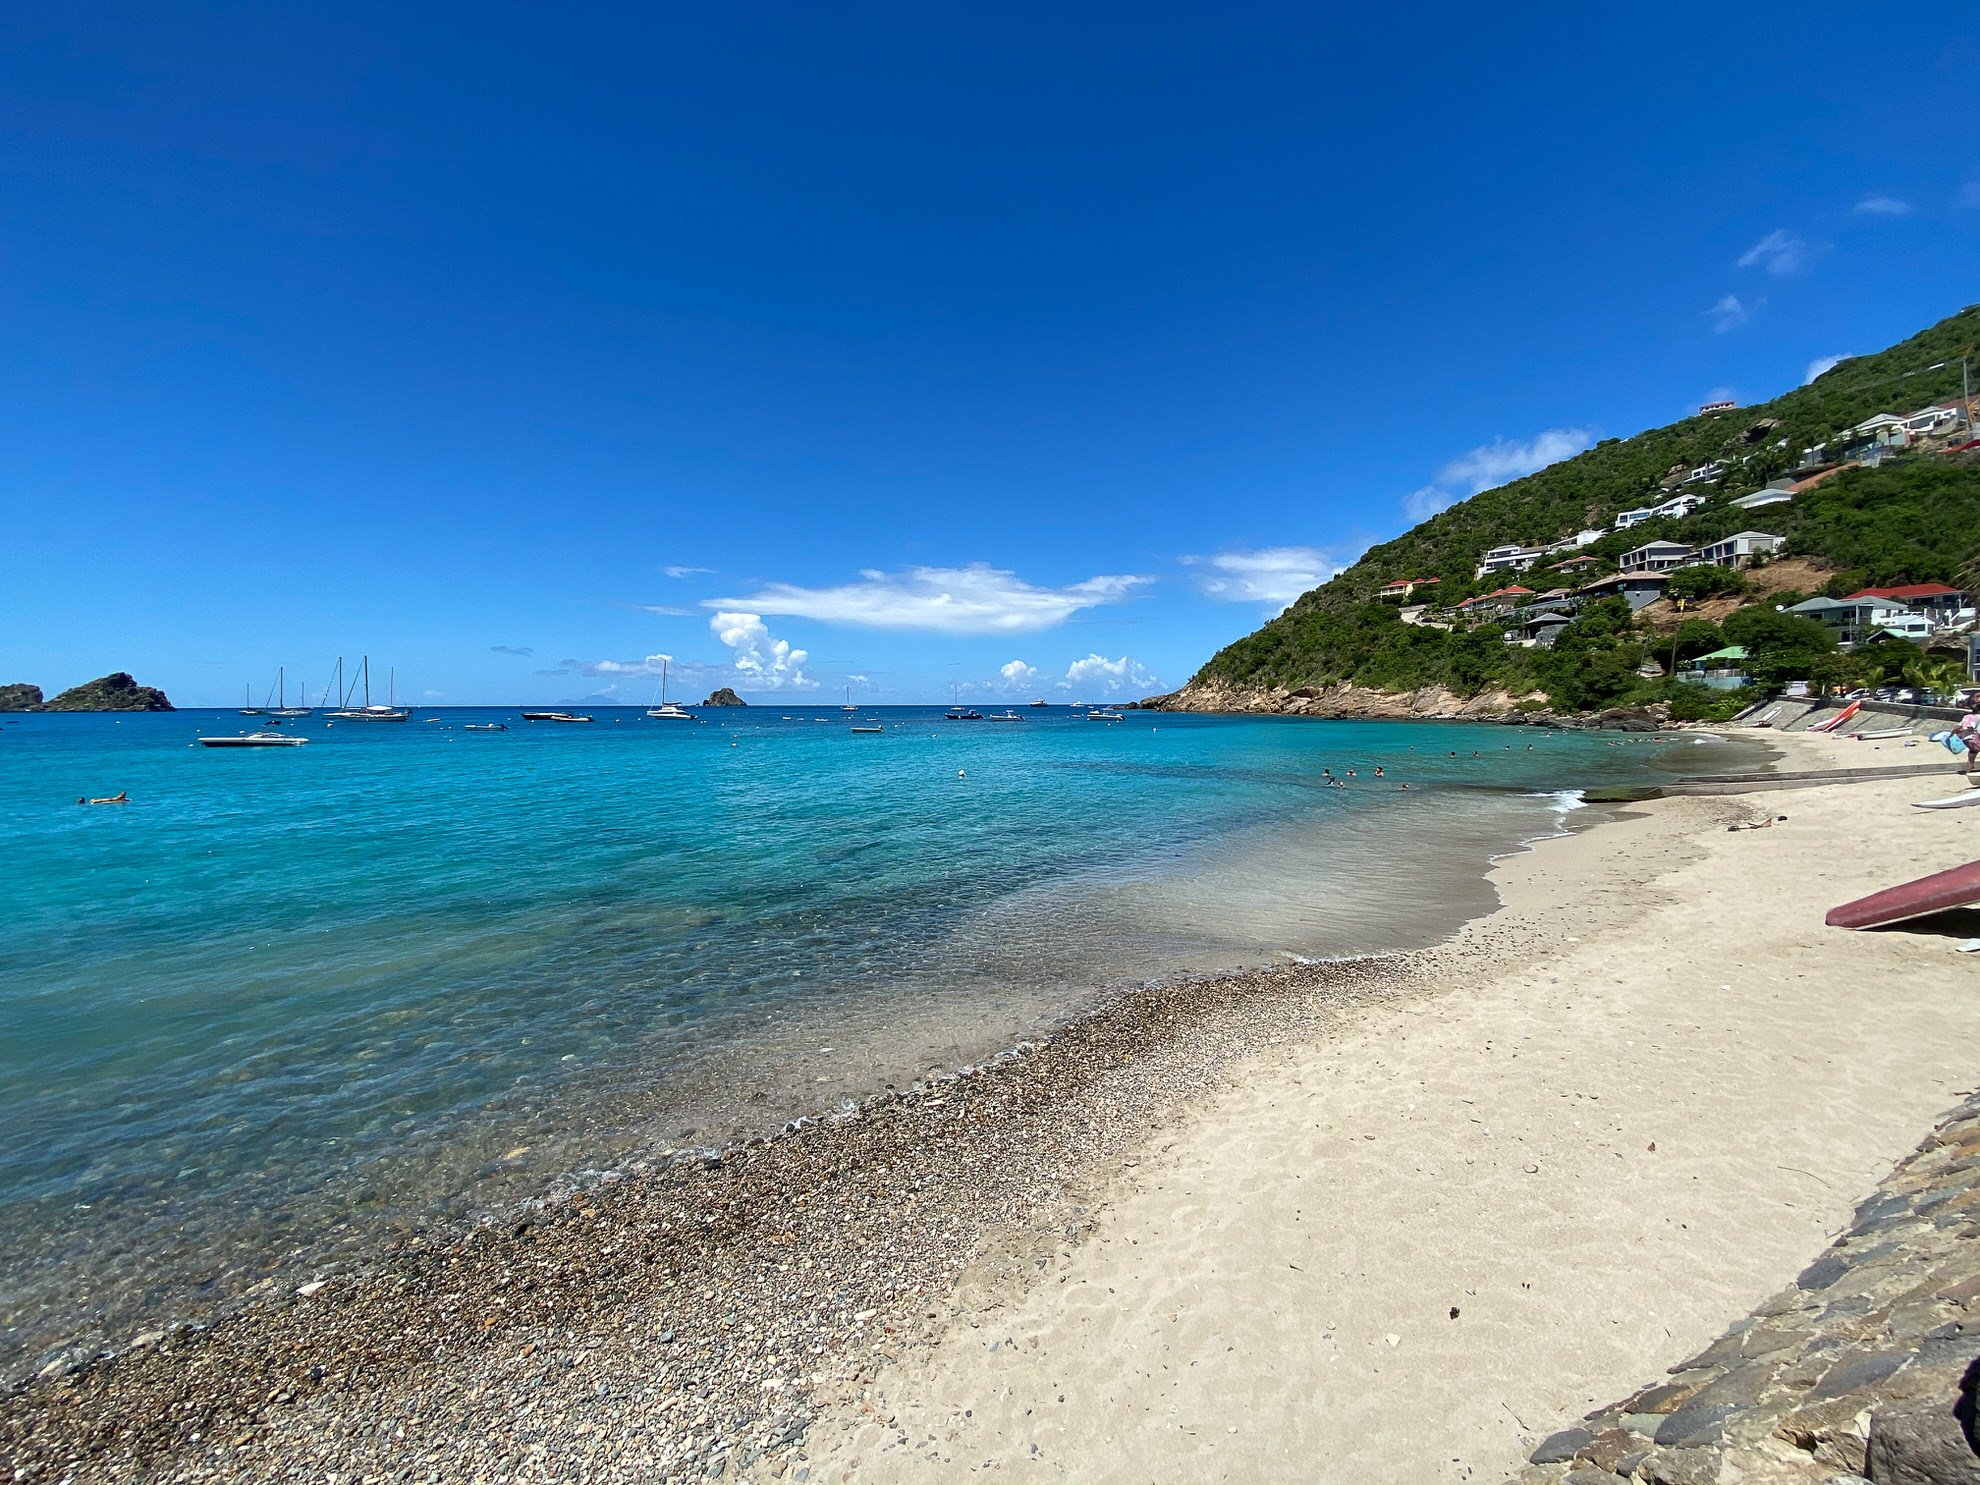 St Barts Beaches - Ultimate Guide to the Best Beaches on St Barths